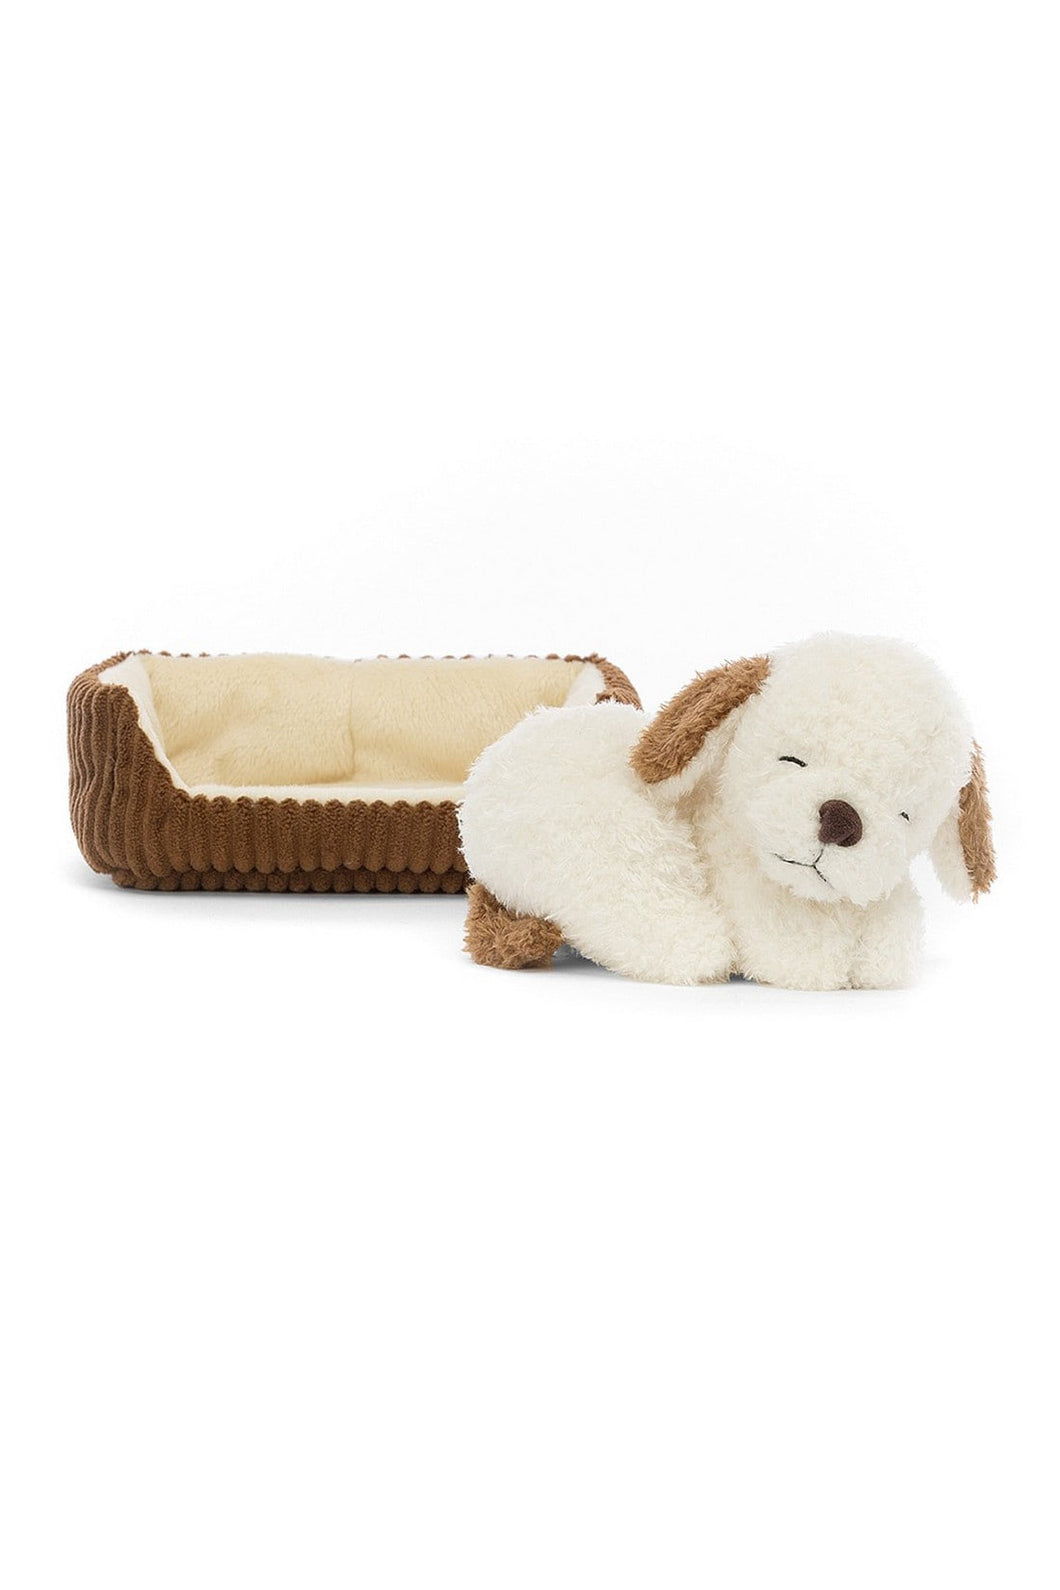 Jellycat Napping Nipper Dog 1